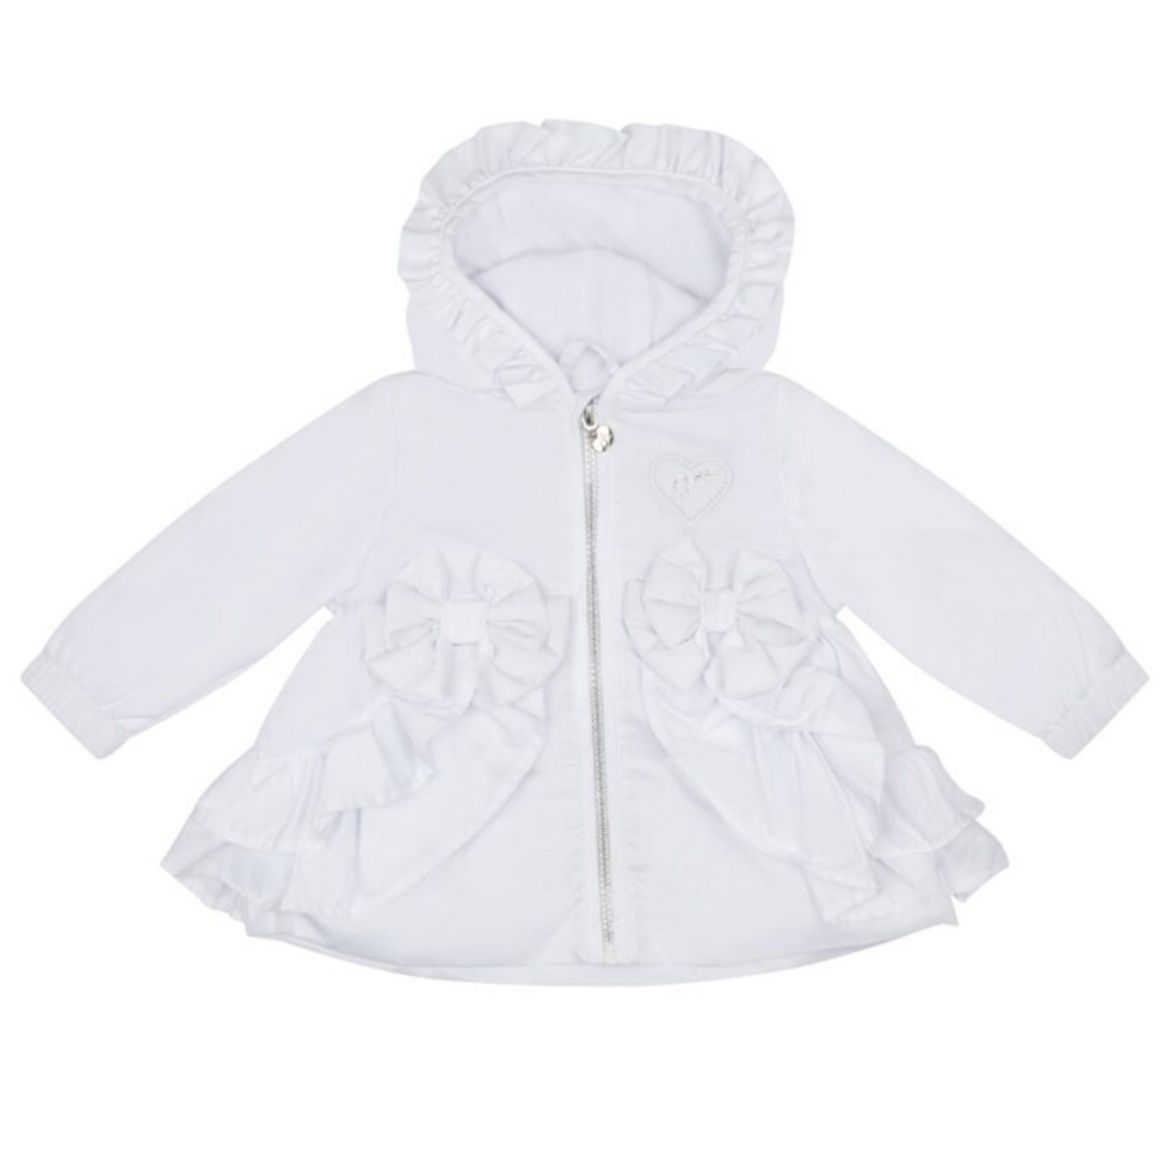 Picture of Little A Baby Girls 'Jillie' White Jacket